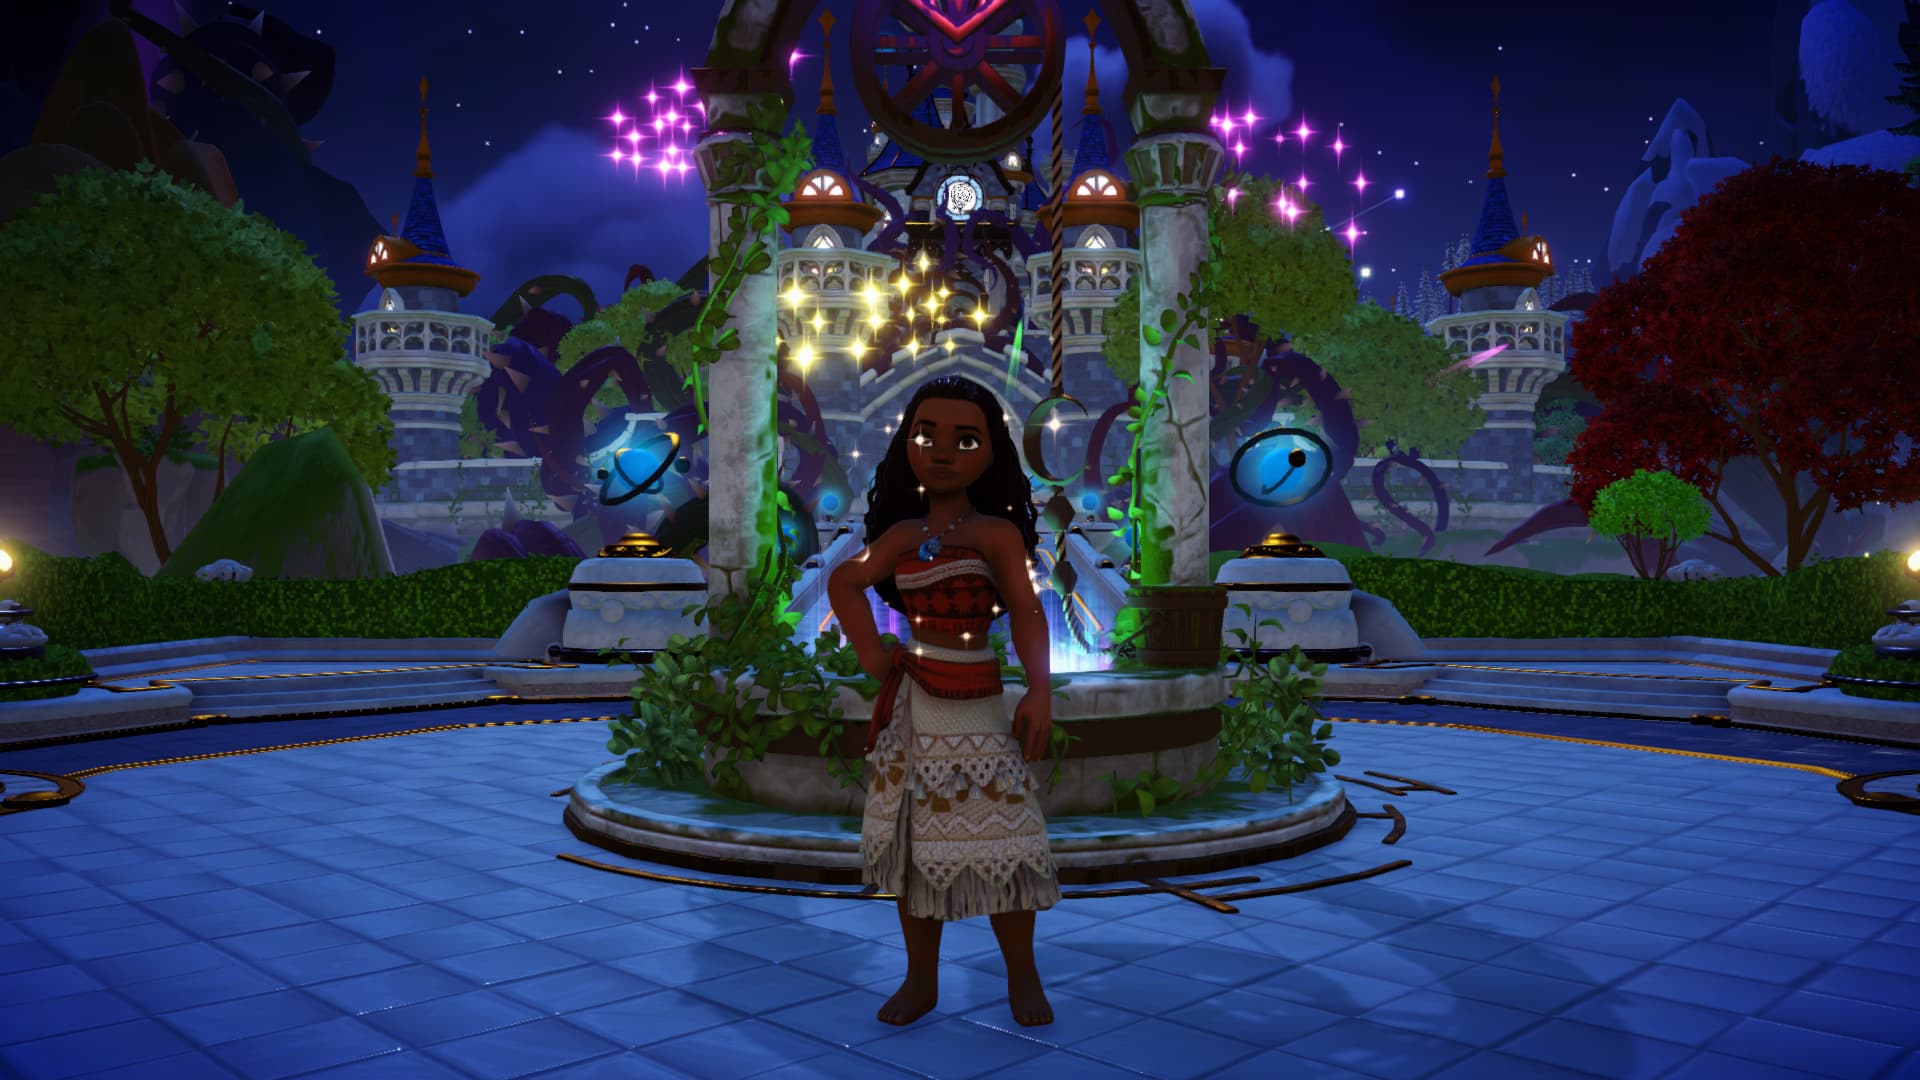 Screenshot of Moana in Dreamlight Valley standing in front of the Well in the Plaza,  Disney Dreamlight Valley Moana Guide